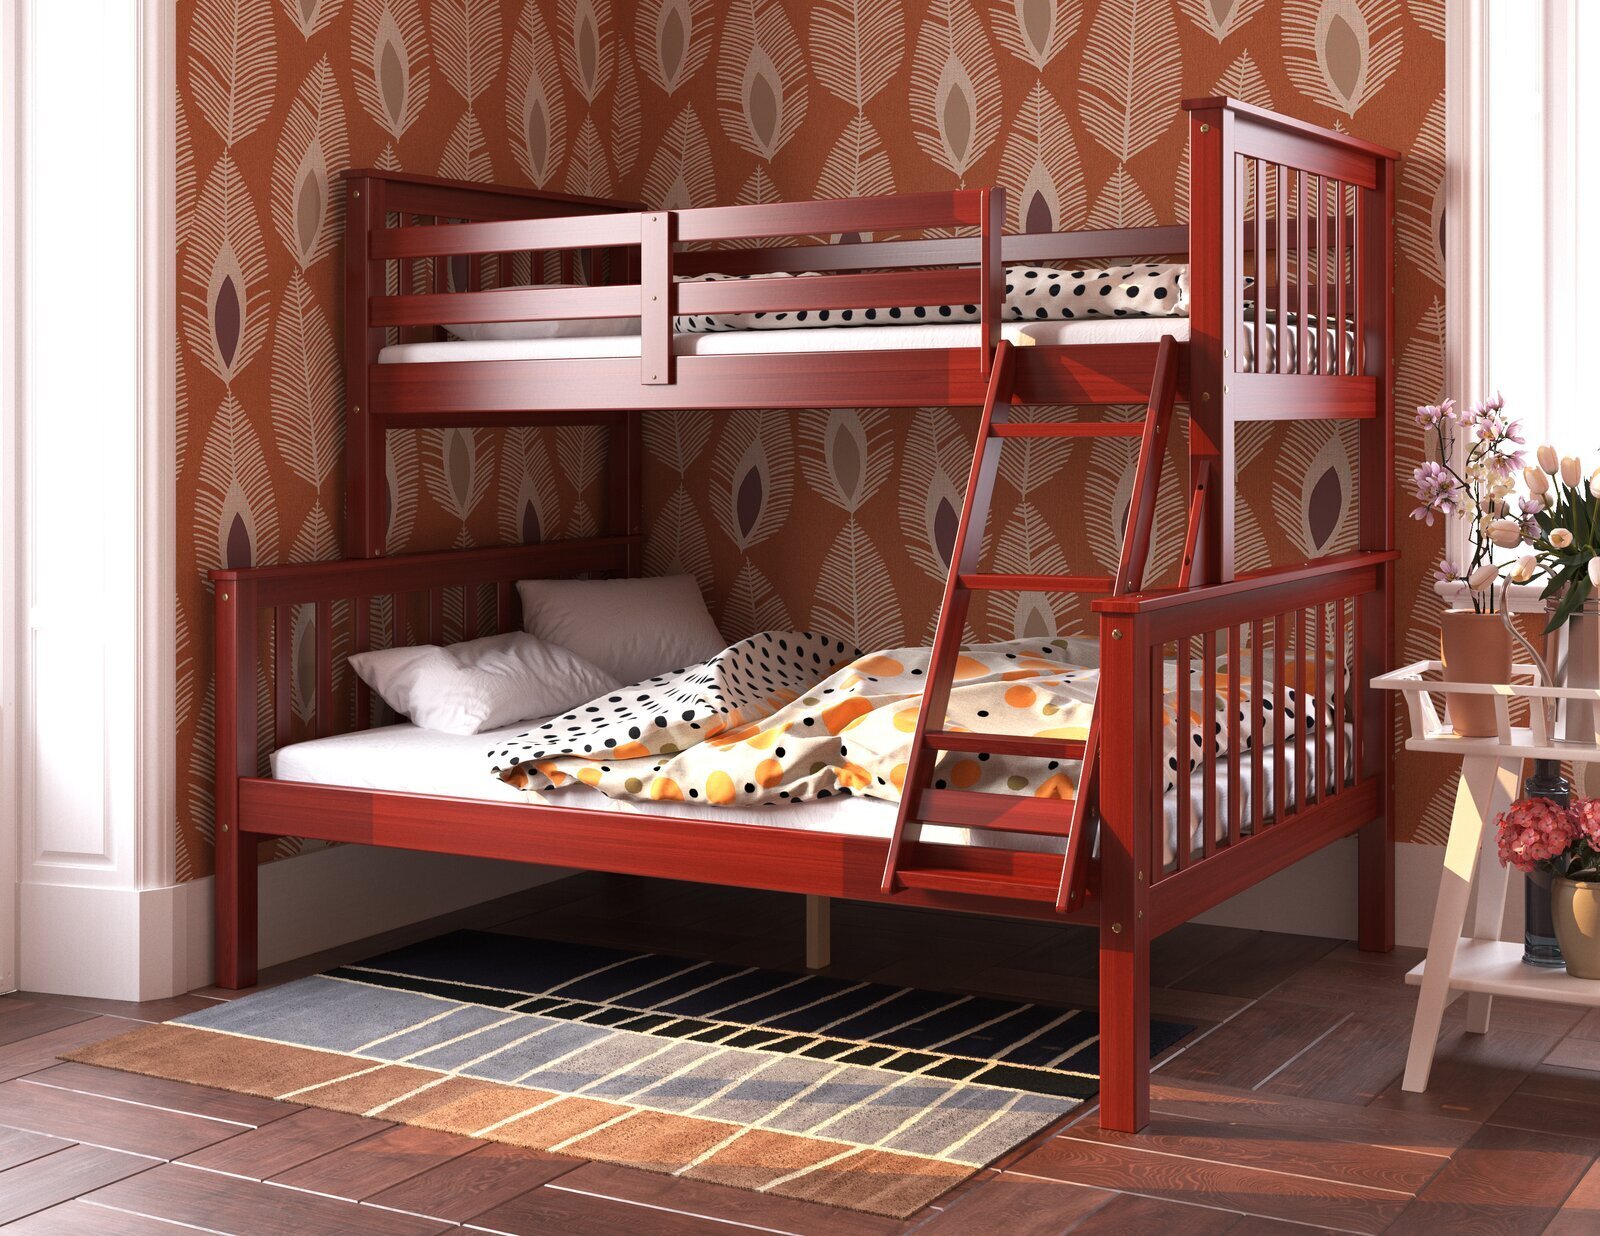 Traditional Rustic Bunk Bed Twin Over Full